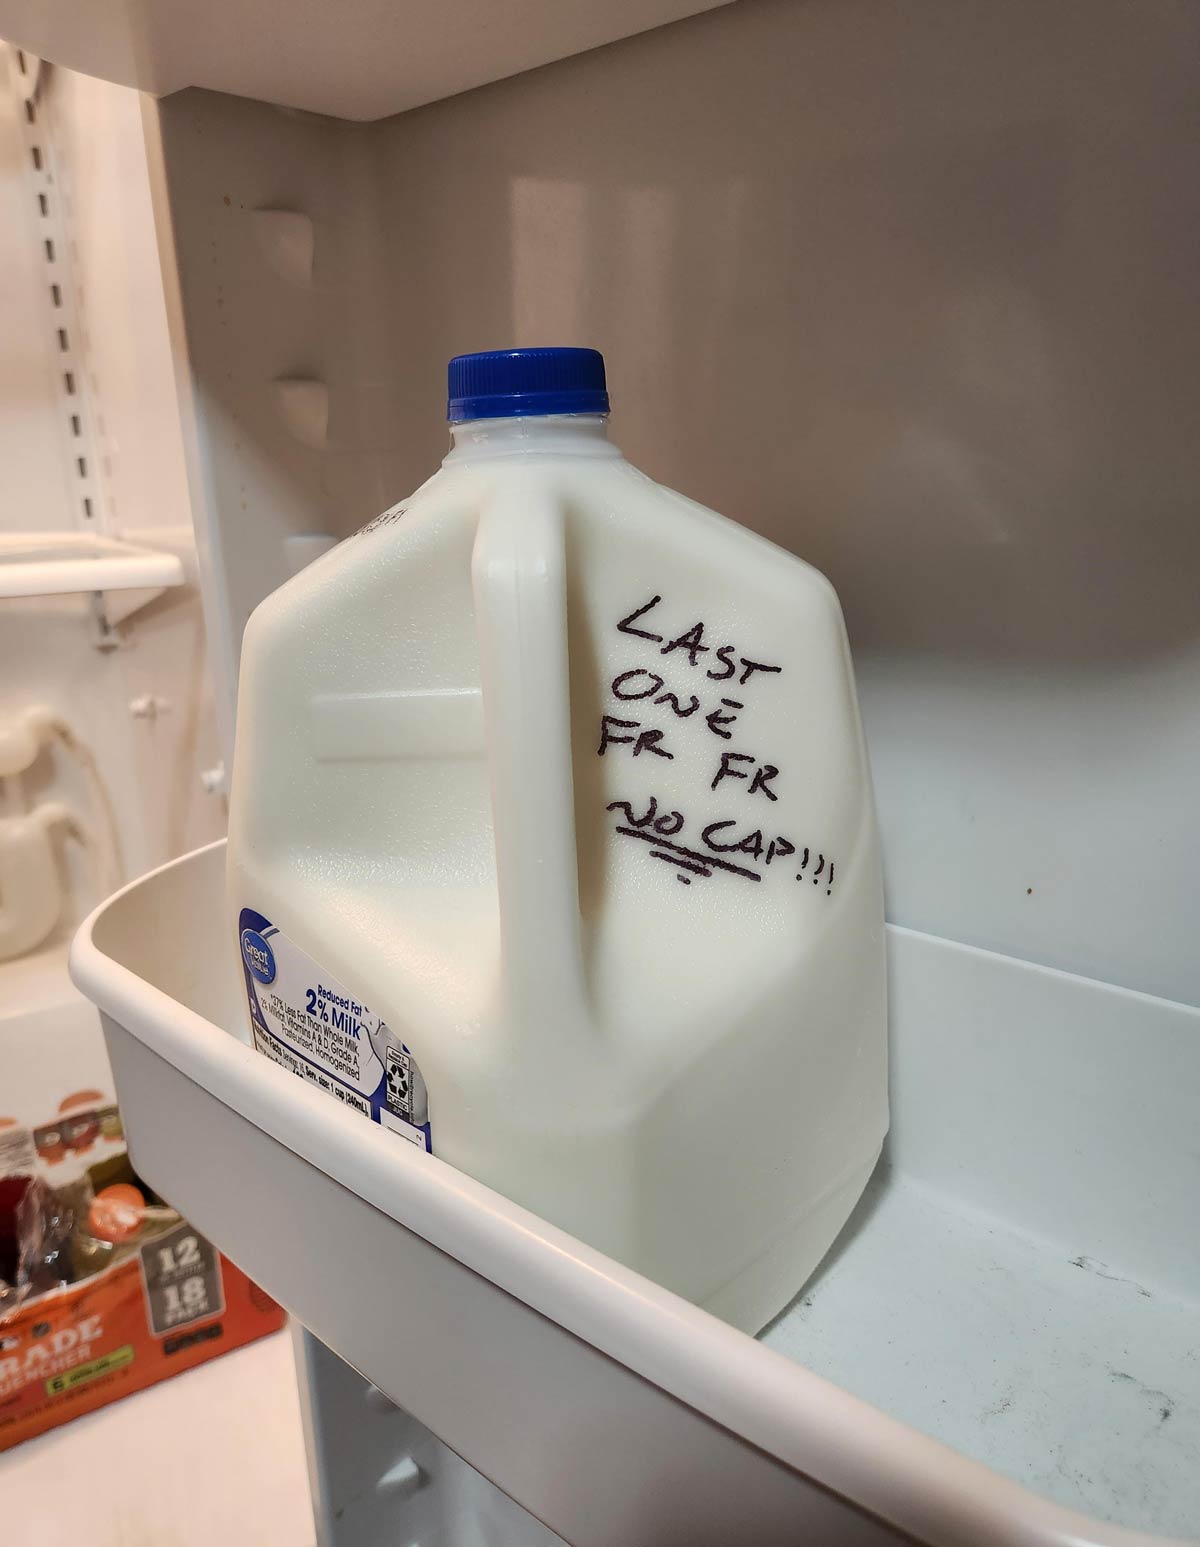 With four kids, I need a way to communicate with them so that we don't run out of milk. So far it's working great